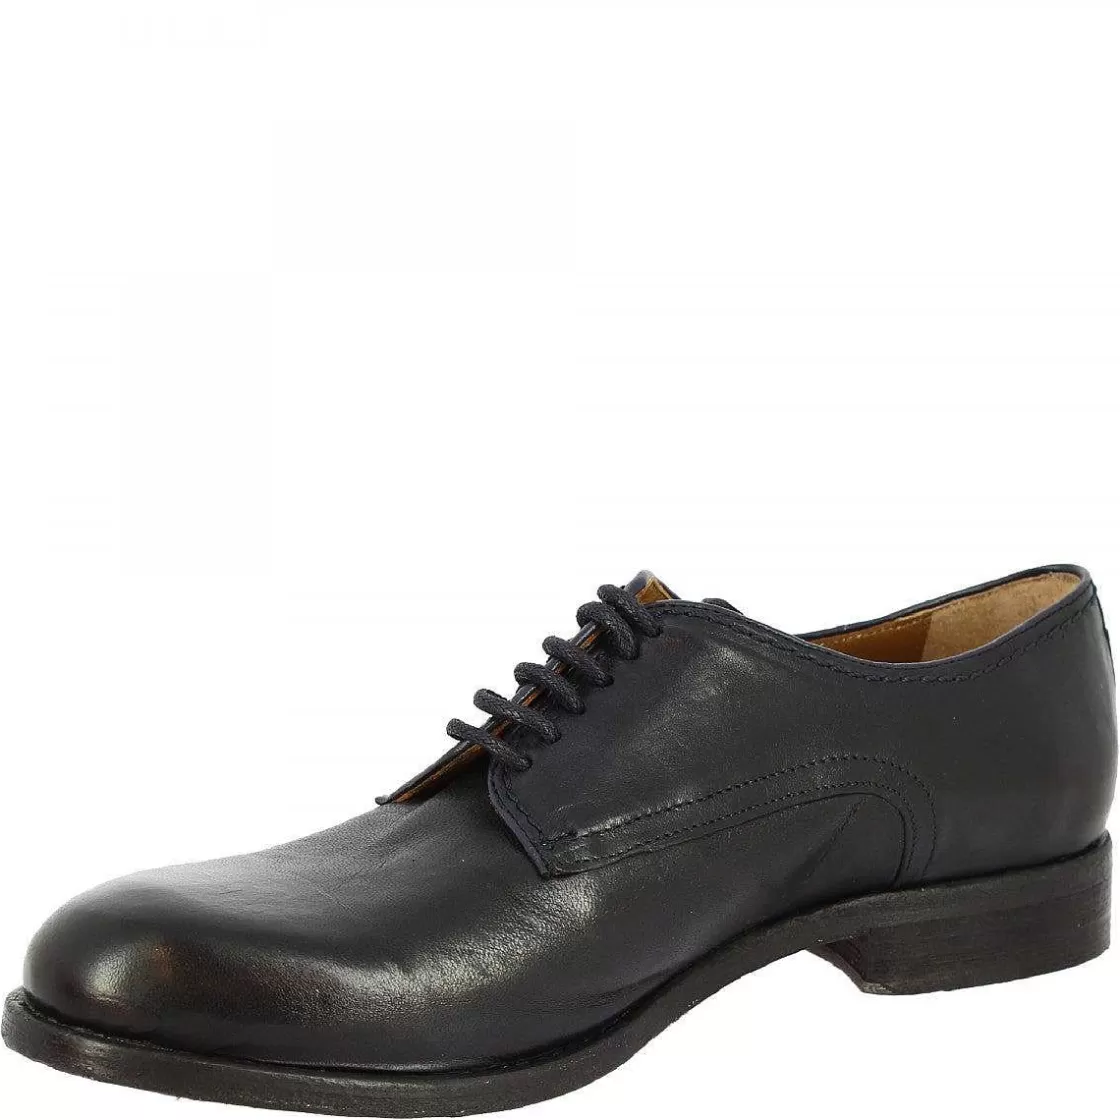 Leonardo Men'S Handmade Lace-Up Oxford Shoes In Blue Black Calf Leather Discount